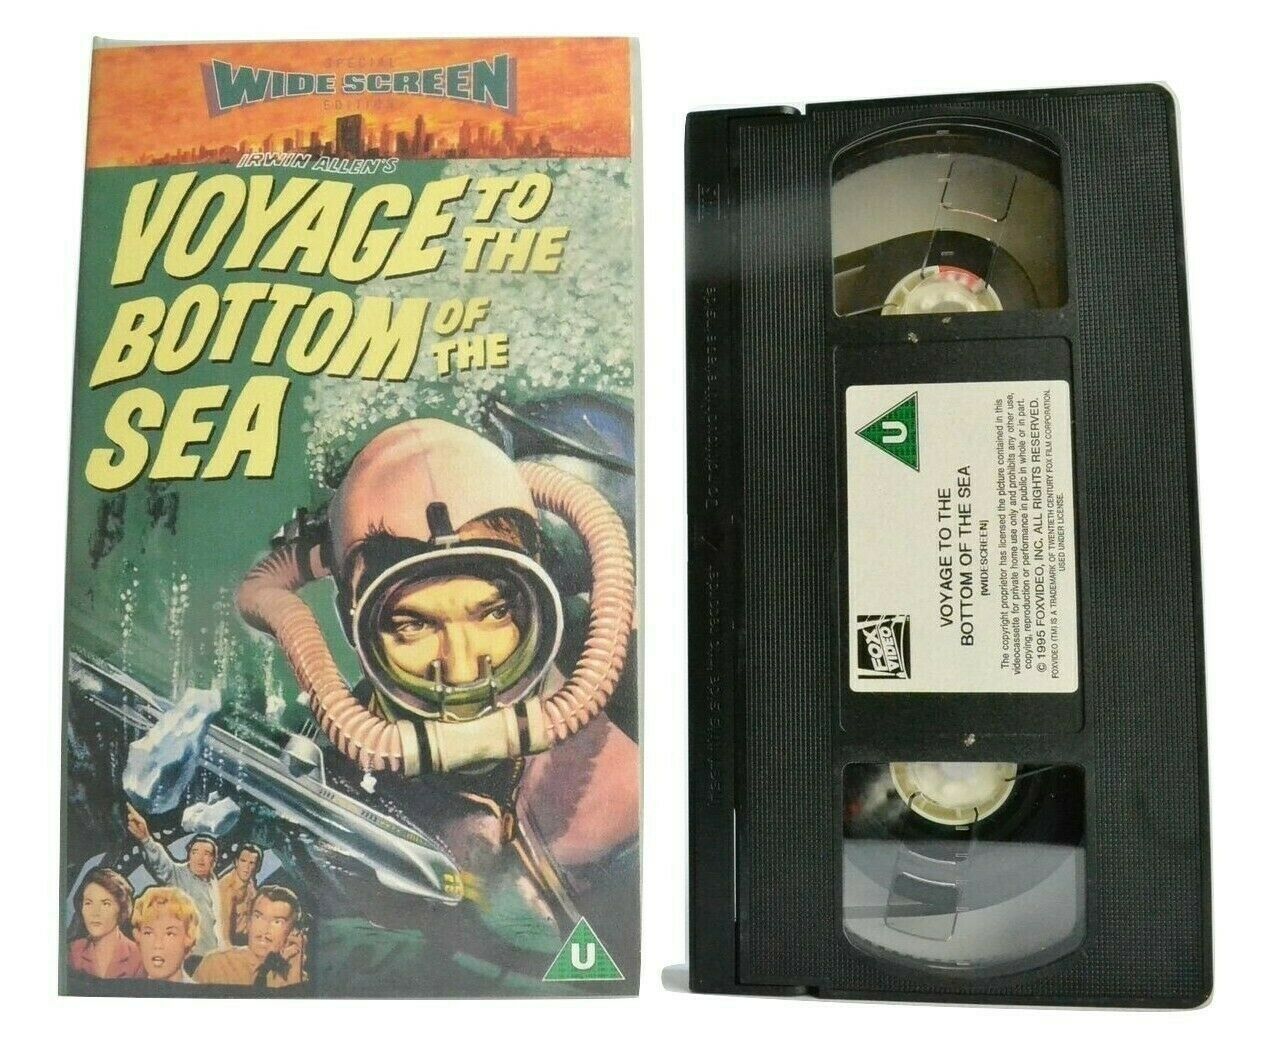 Voyage To The Bottom Of The Sea [Widescreen] Sci-Fi Action - Barbara Eden - VHS-